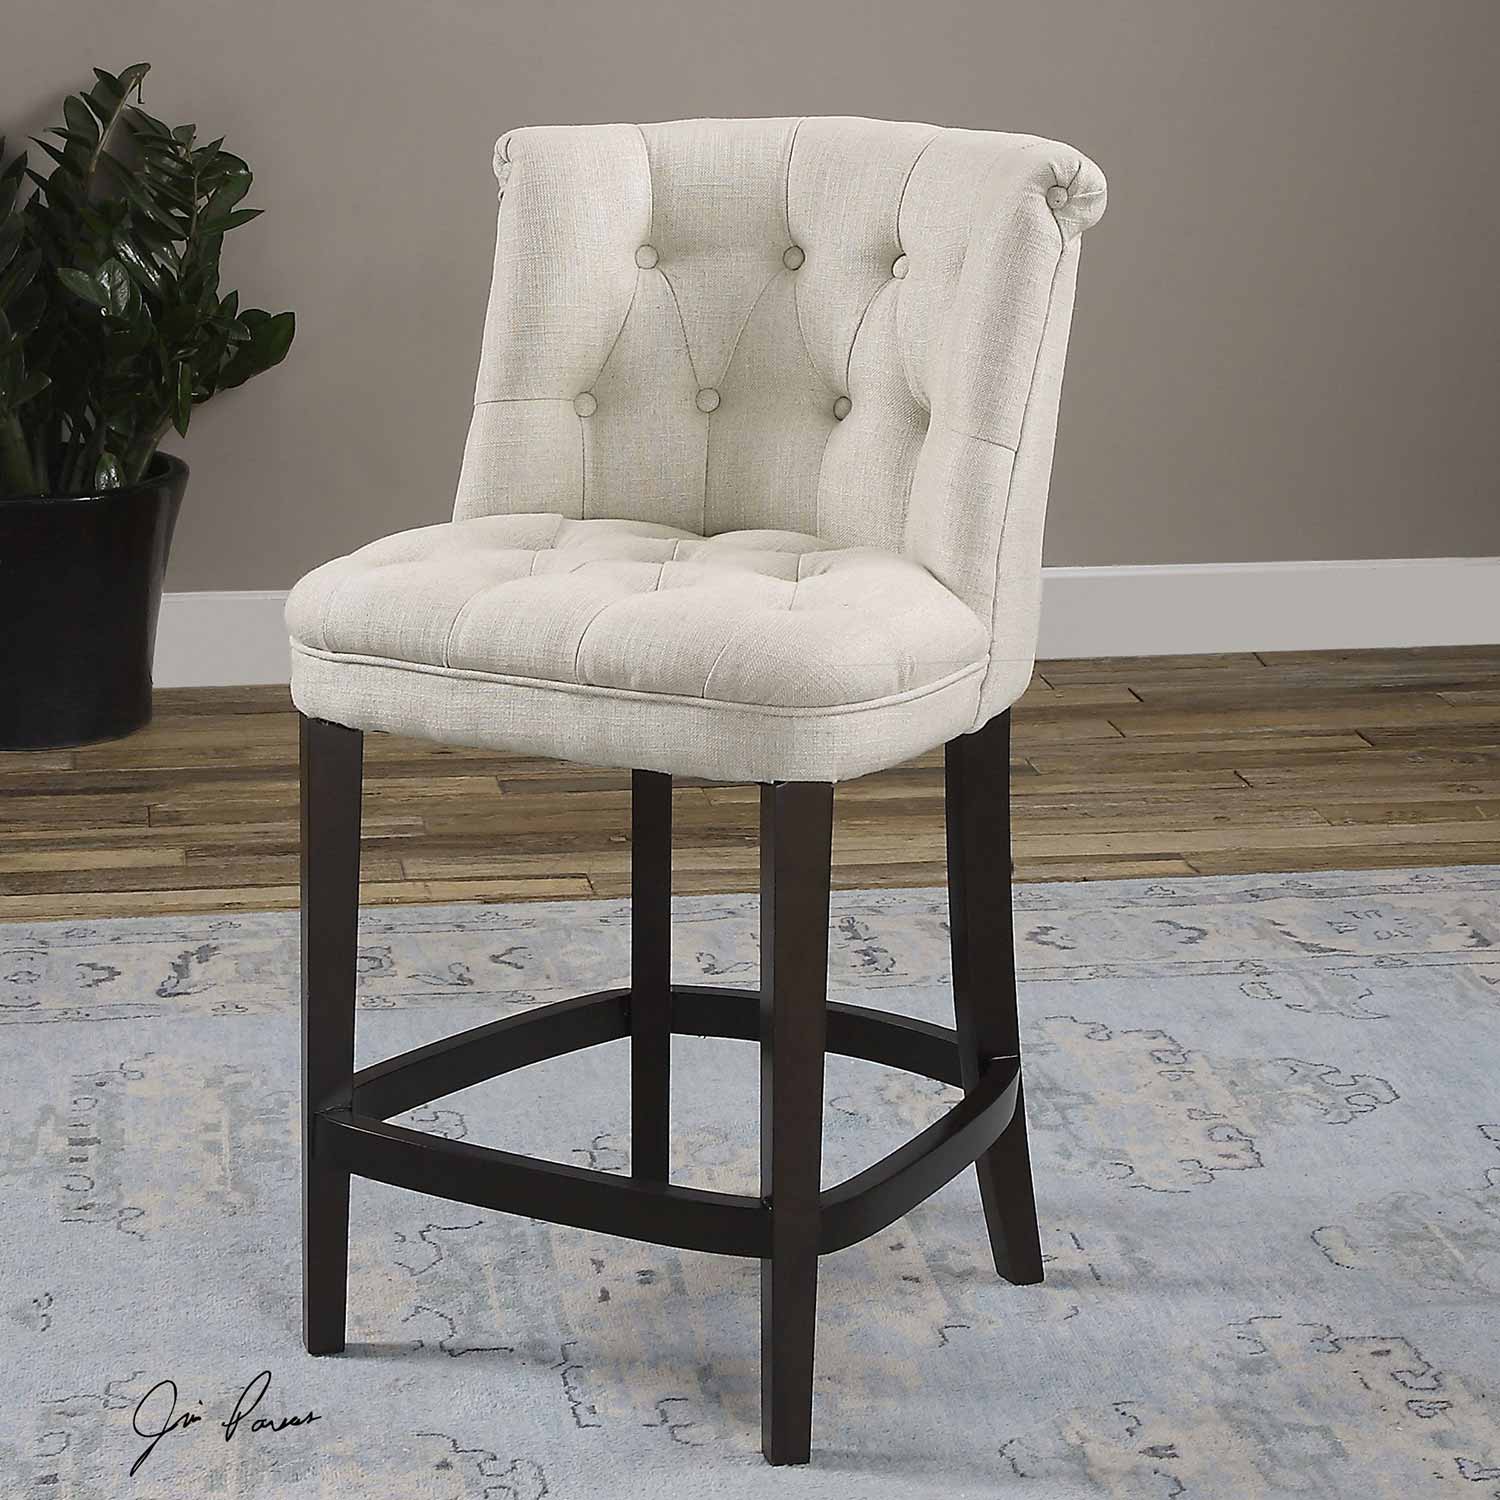 Uttermost Kavanagh Tufted Counter Stool